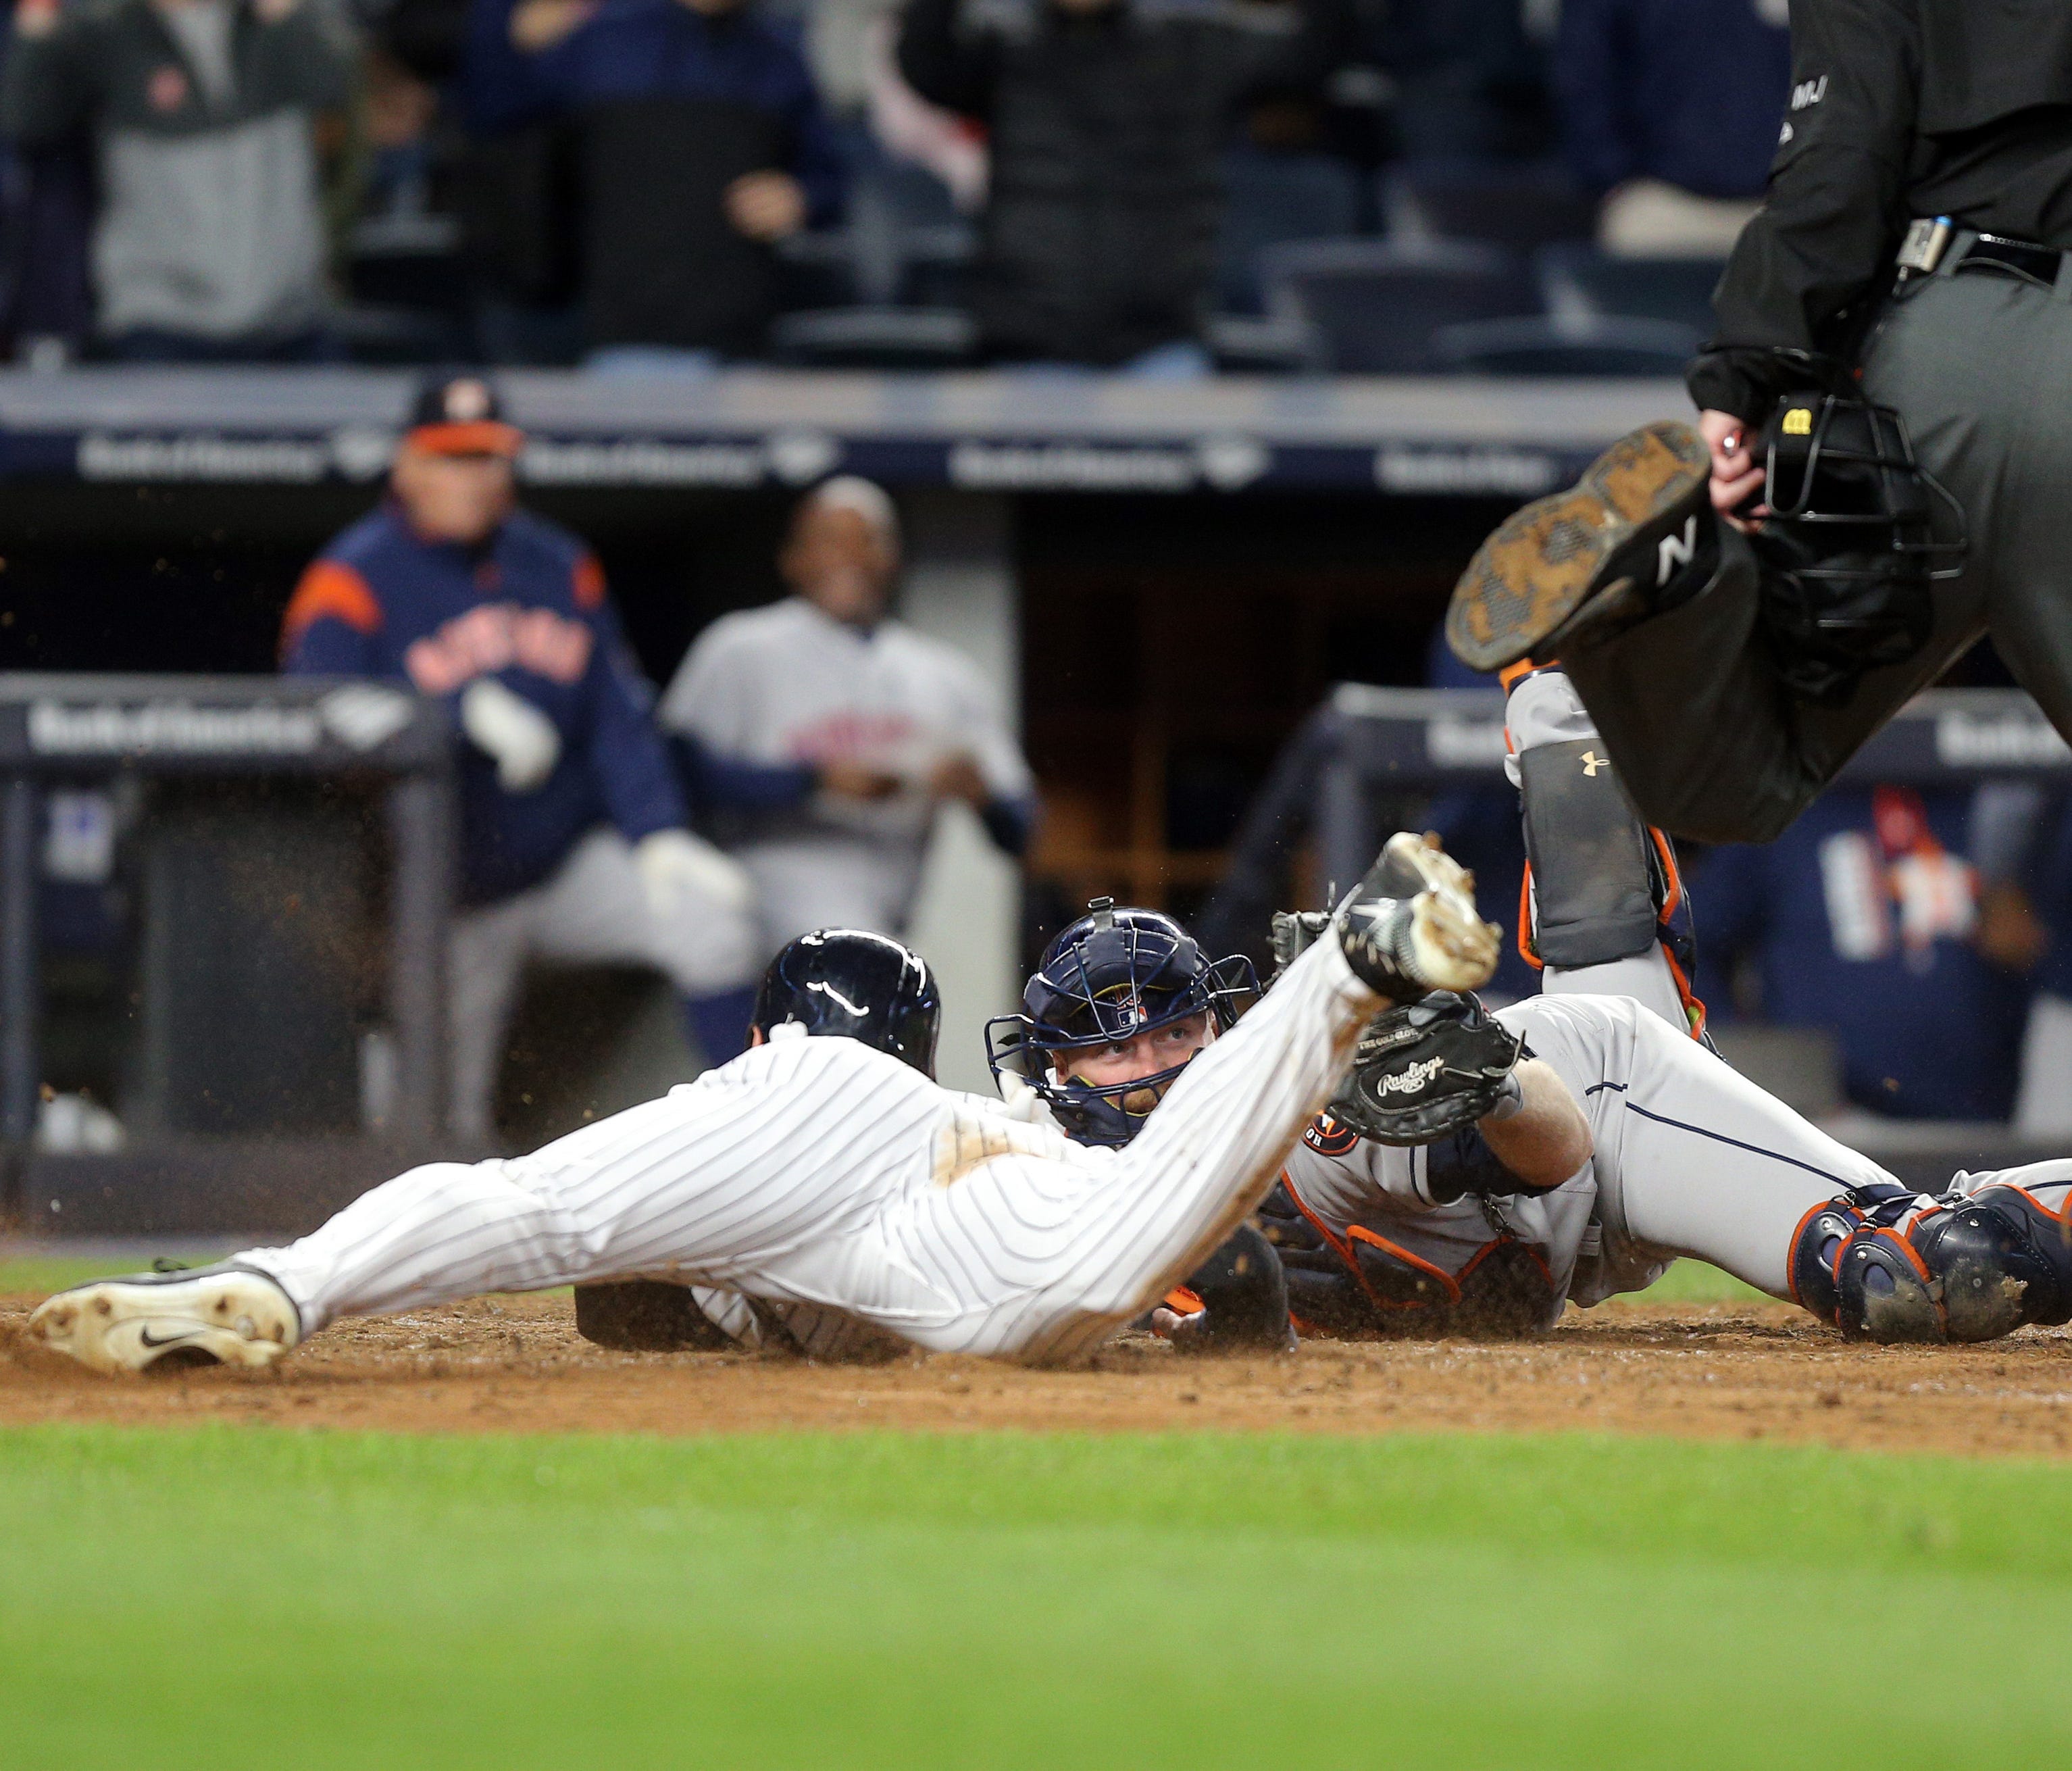 The Yankees' Jacoby Ellsbury, left, is tagged out to end the game by Astros catcher Brian McCann, right, preventing the tying run from scoring at Yankee Stadium.